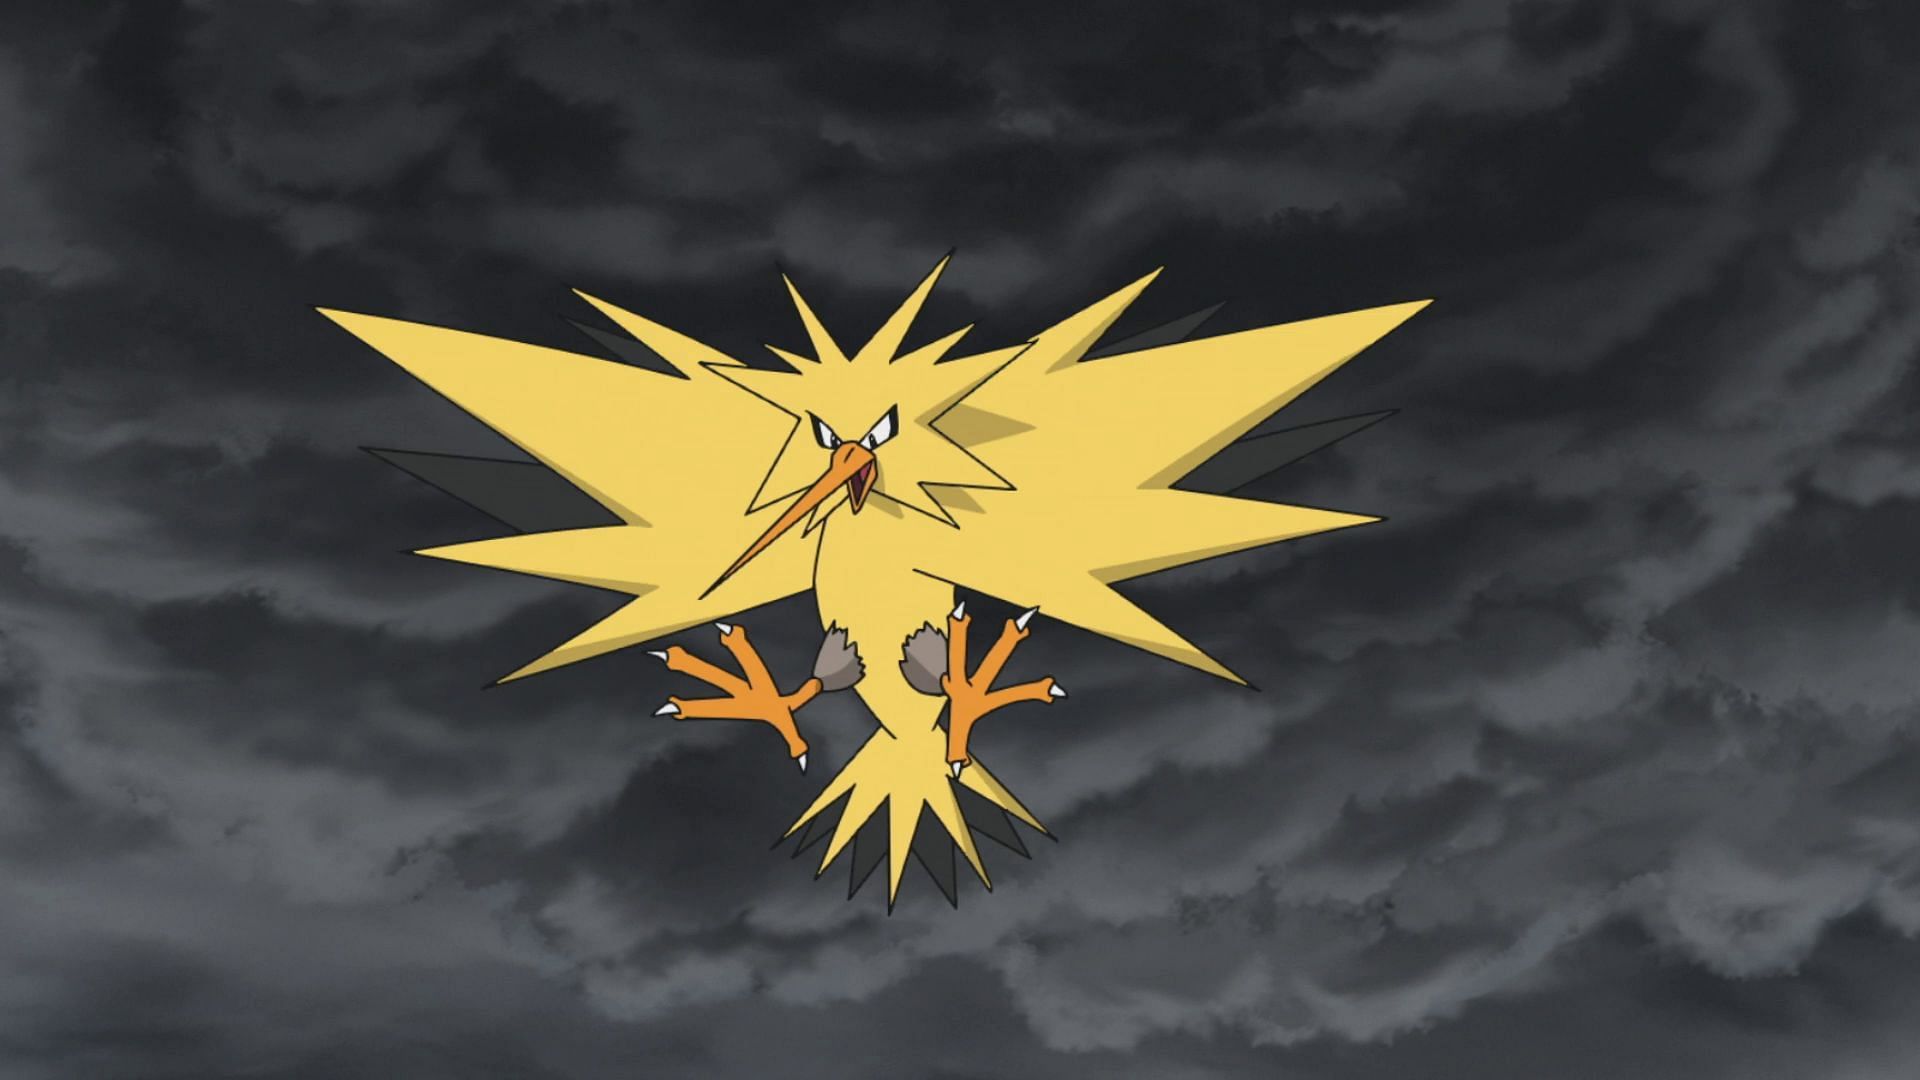 Zapdos rests around the Power Plant in the Kanto region (Image via The Pokemon Company)